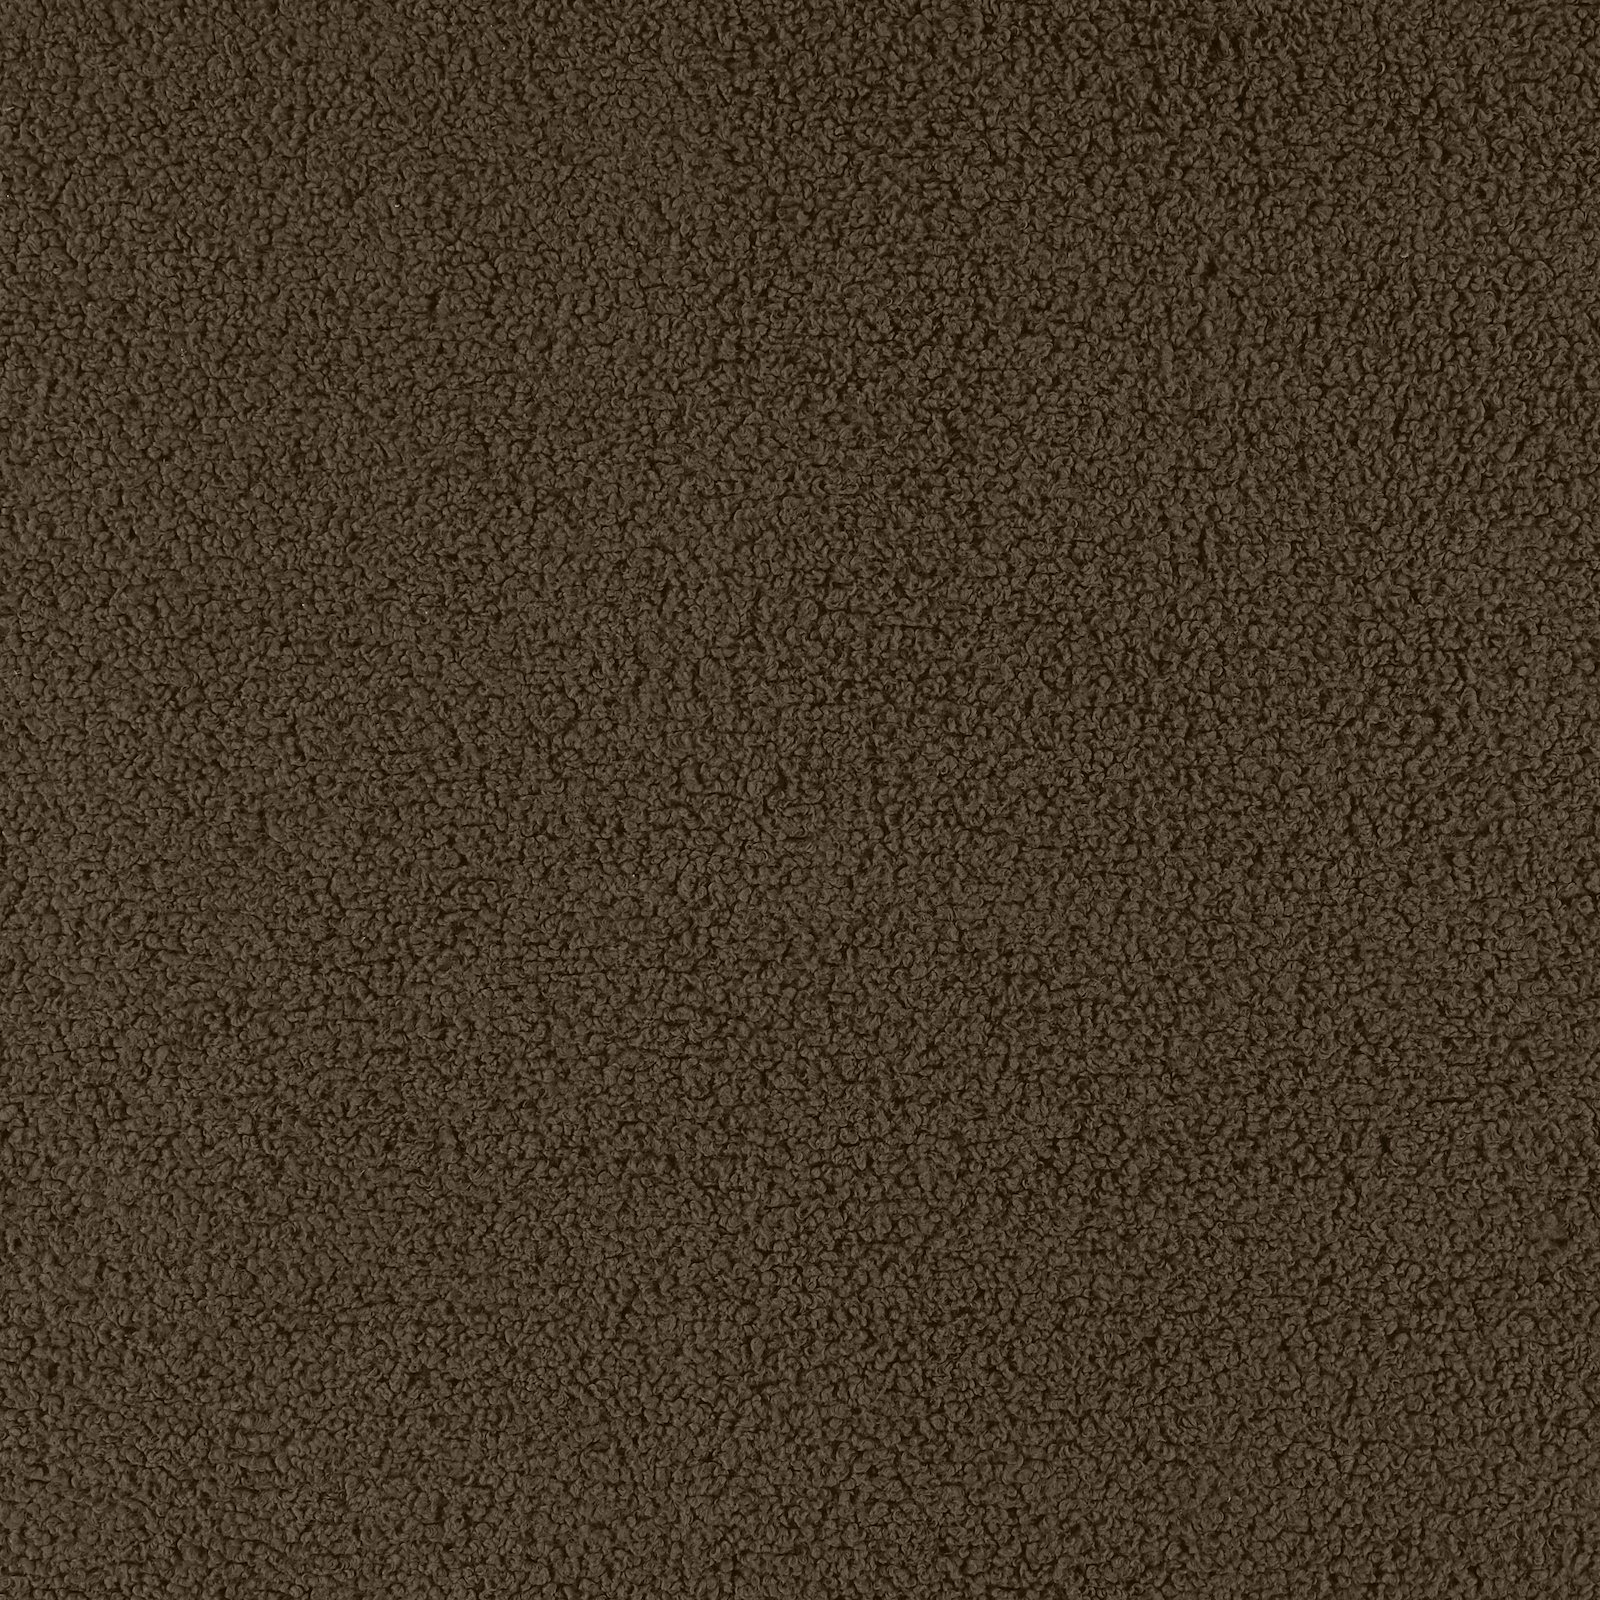 Upholstery fluffy teddy w/backing brown 910321_pack_solid